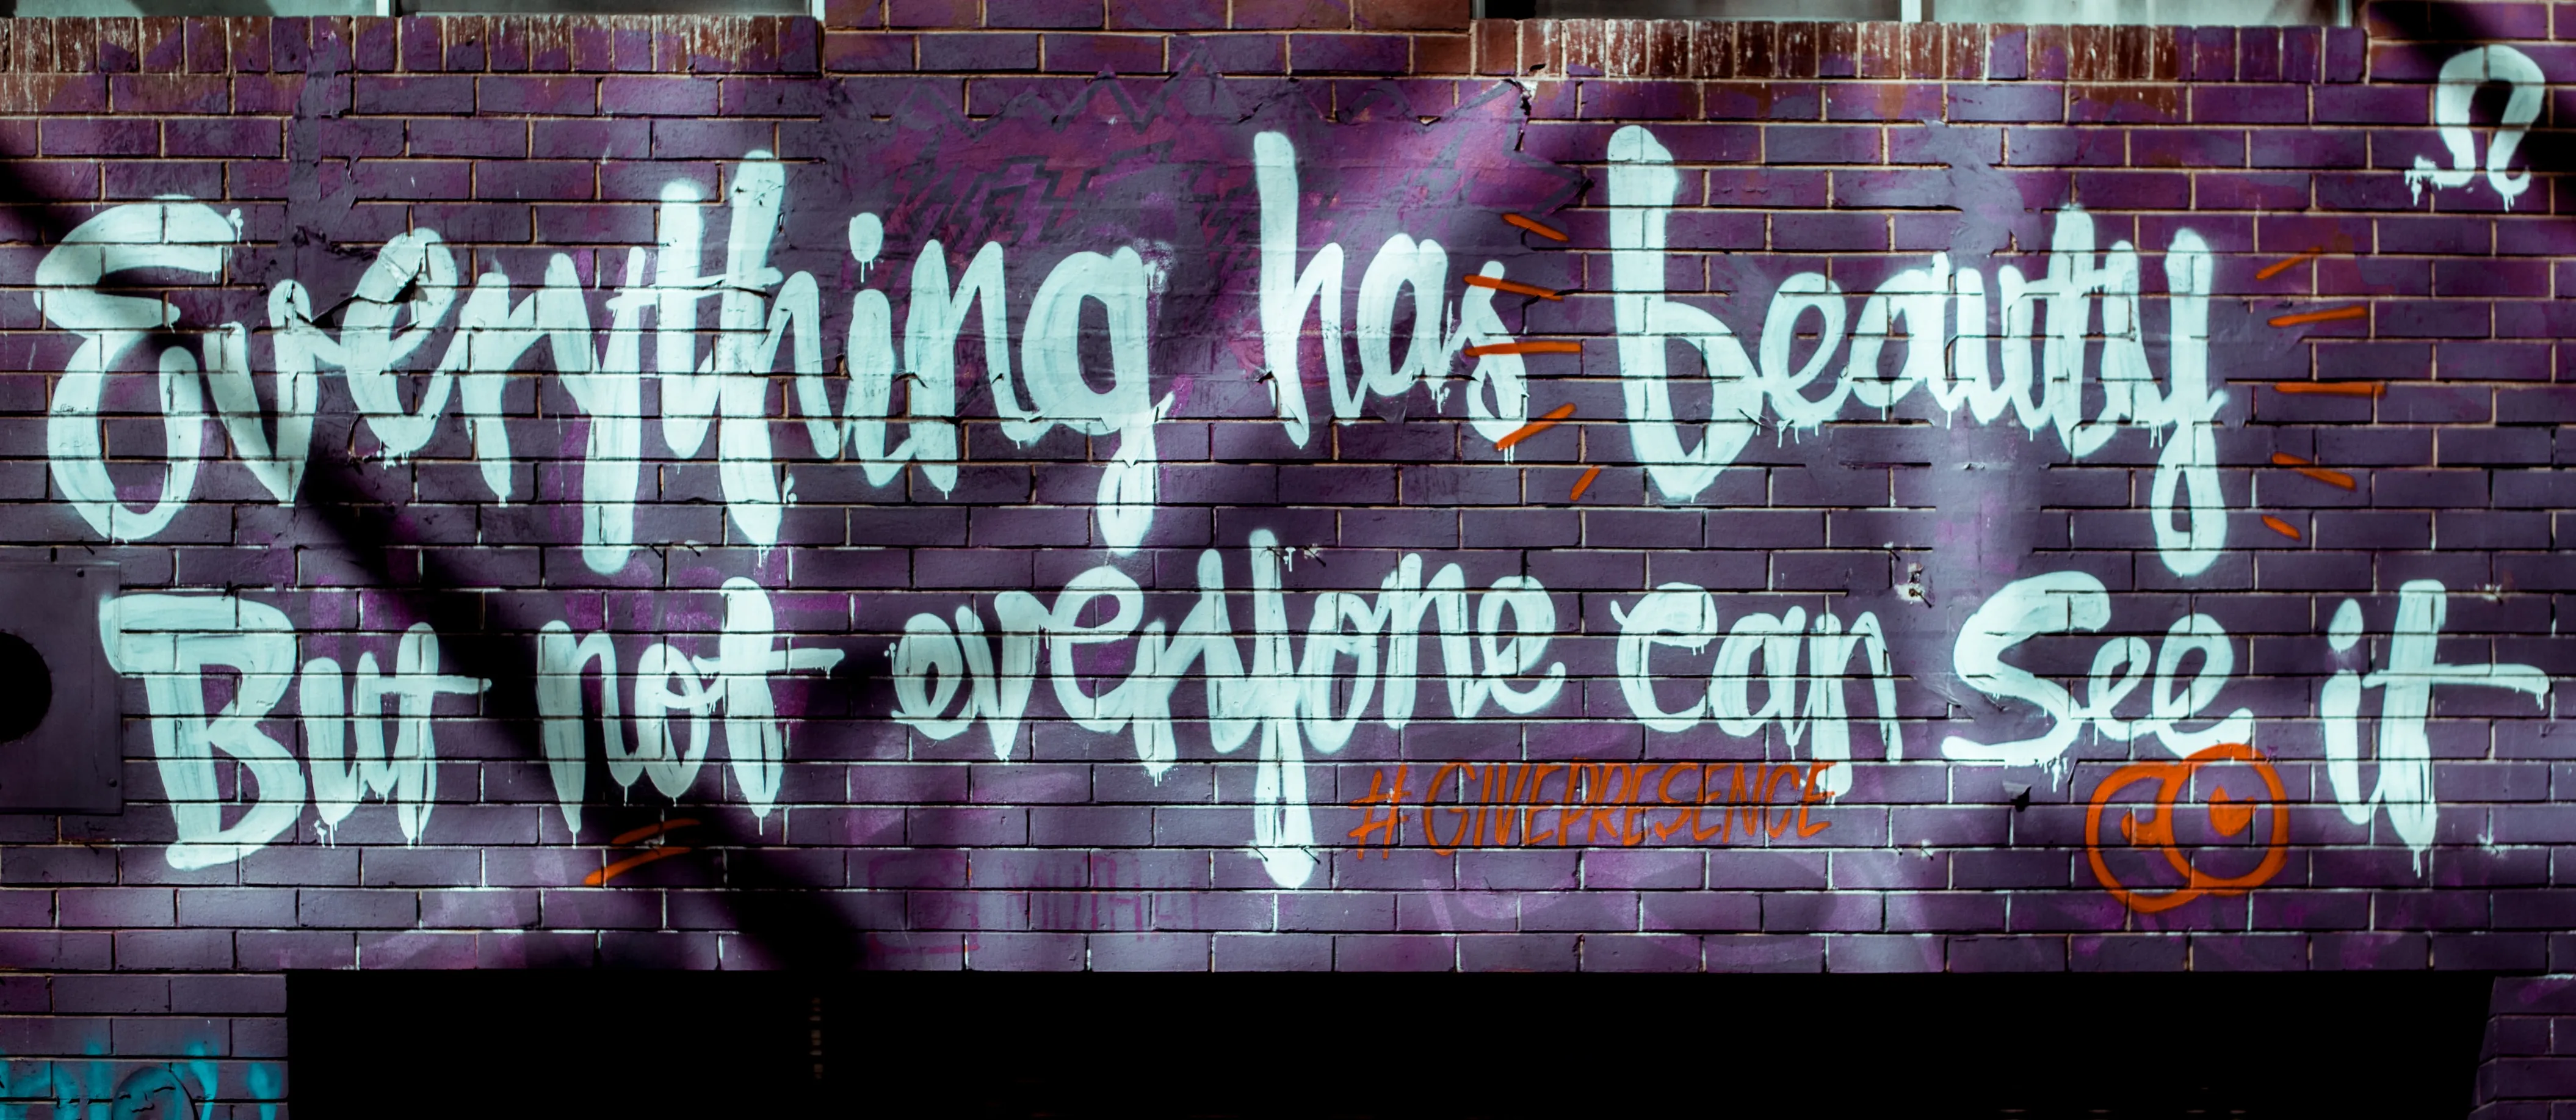 Graffiti on Brick Wall Says Everything Has Beauty but Not Everyone Can See It